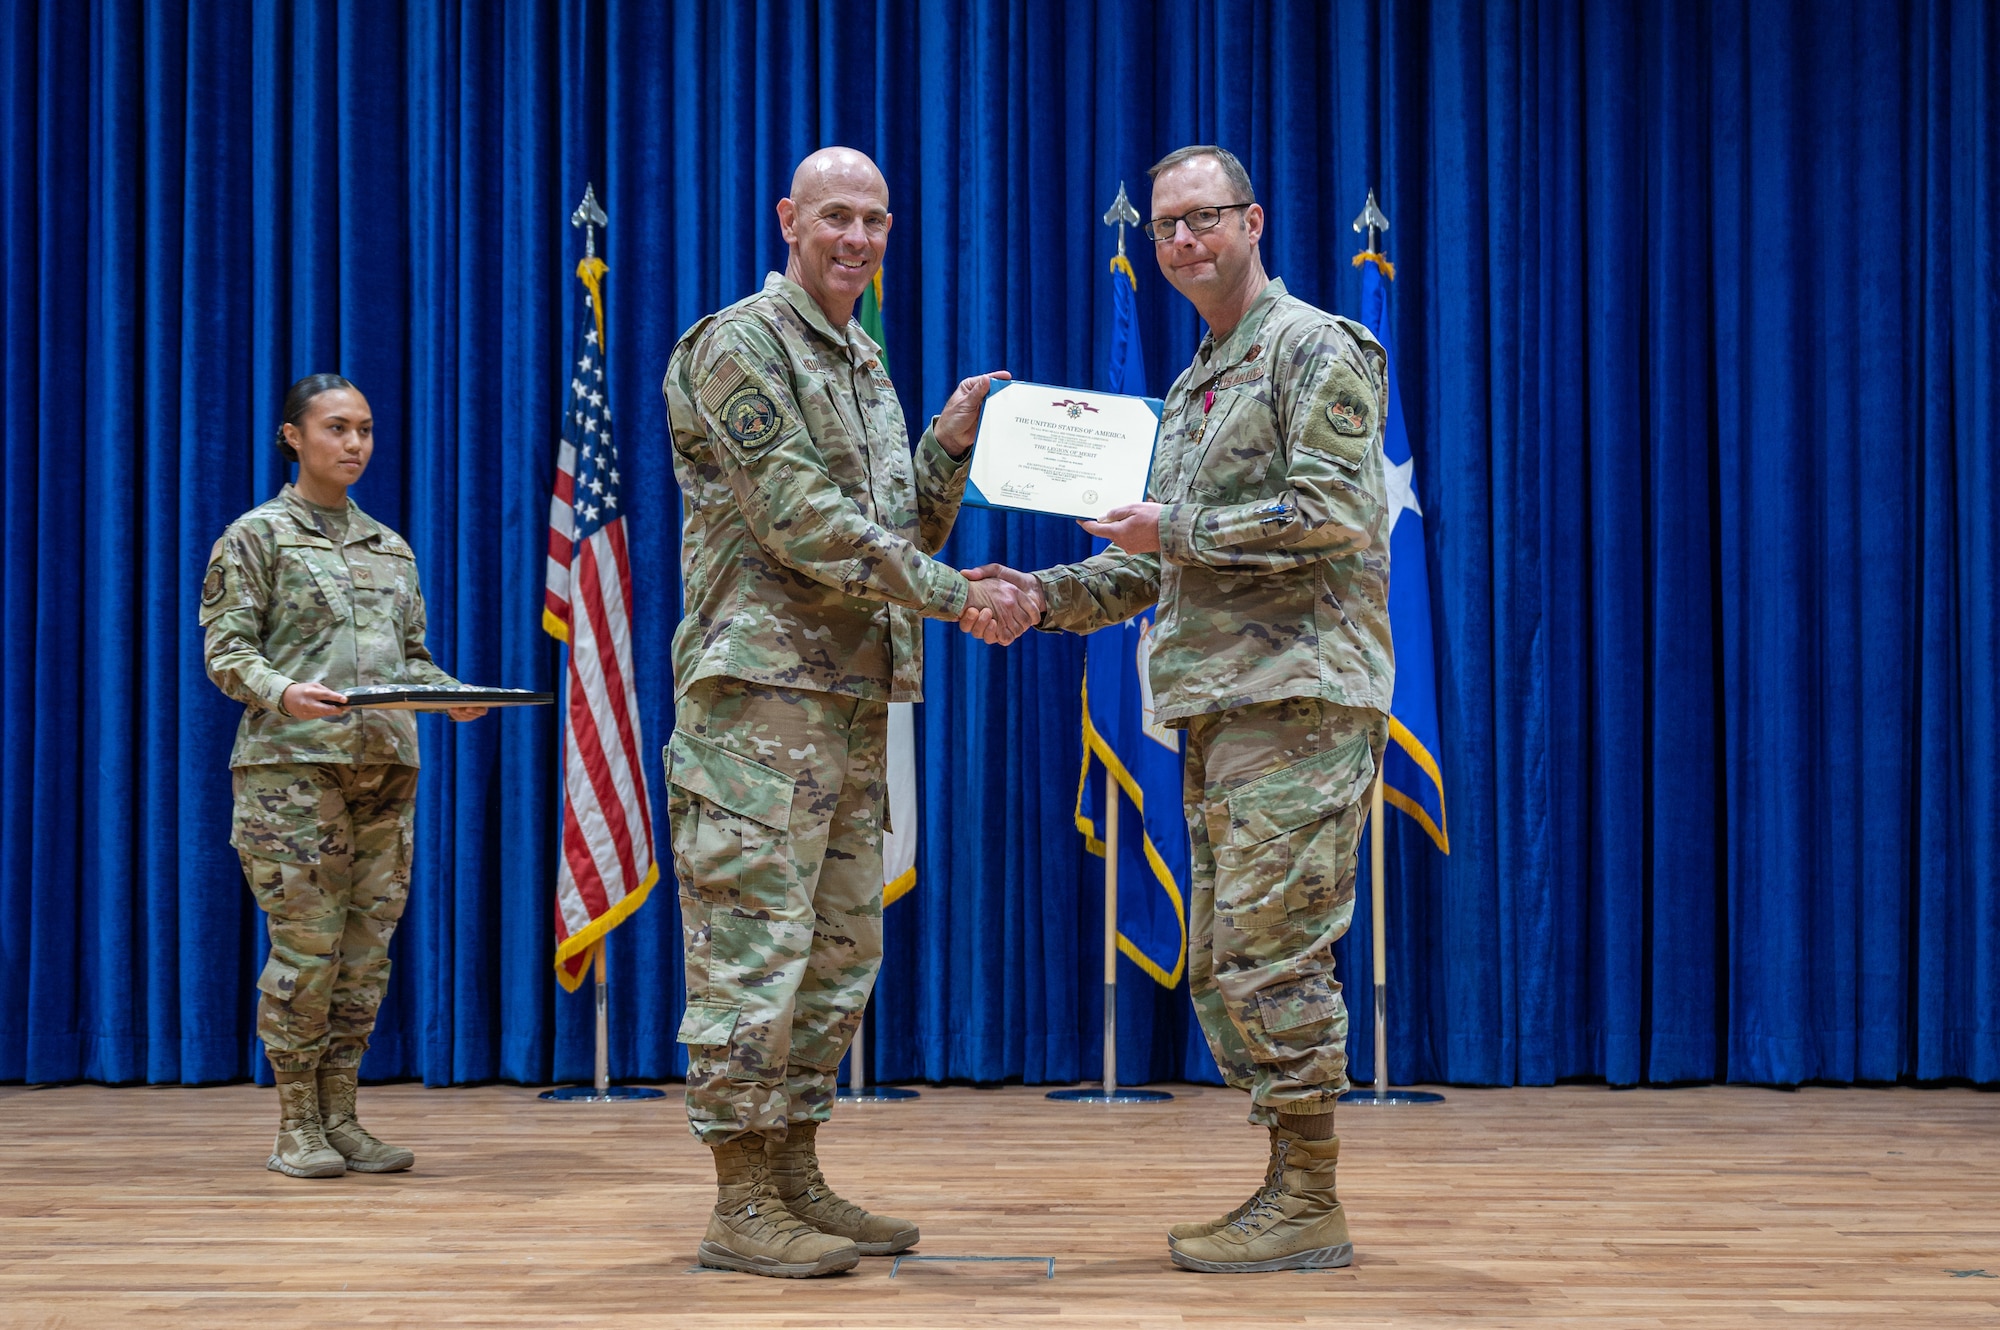 The 386th Air Expeditionary Wing hosted a change of command ceremony at the base theater July 1, 2022.  This was the final ceremony for the 386th AEW as it shifted from the expeditionary group construct to the Air Staff model.